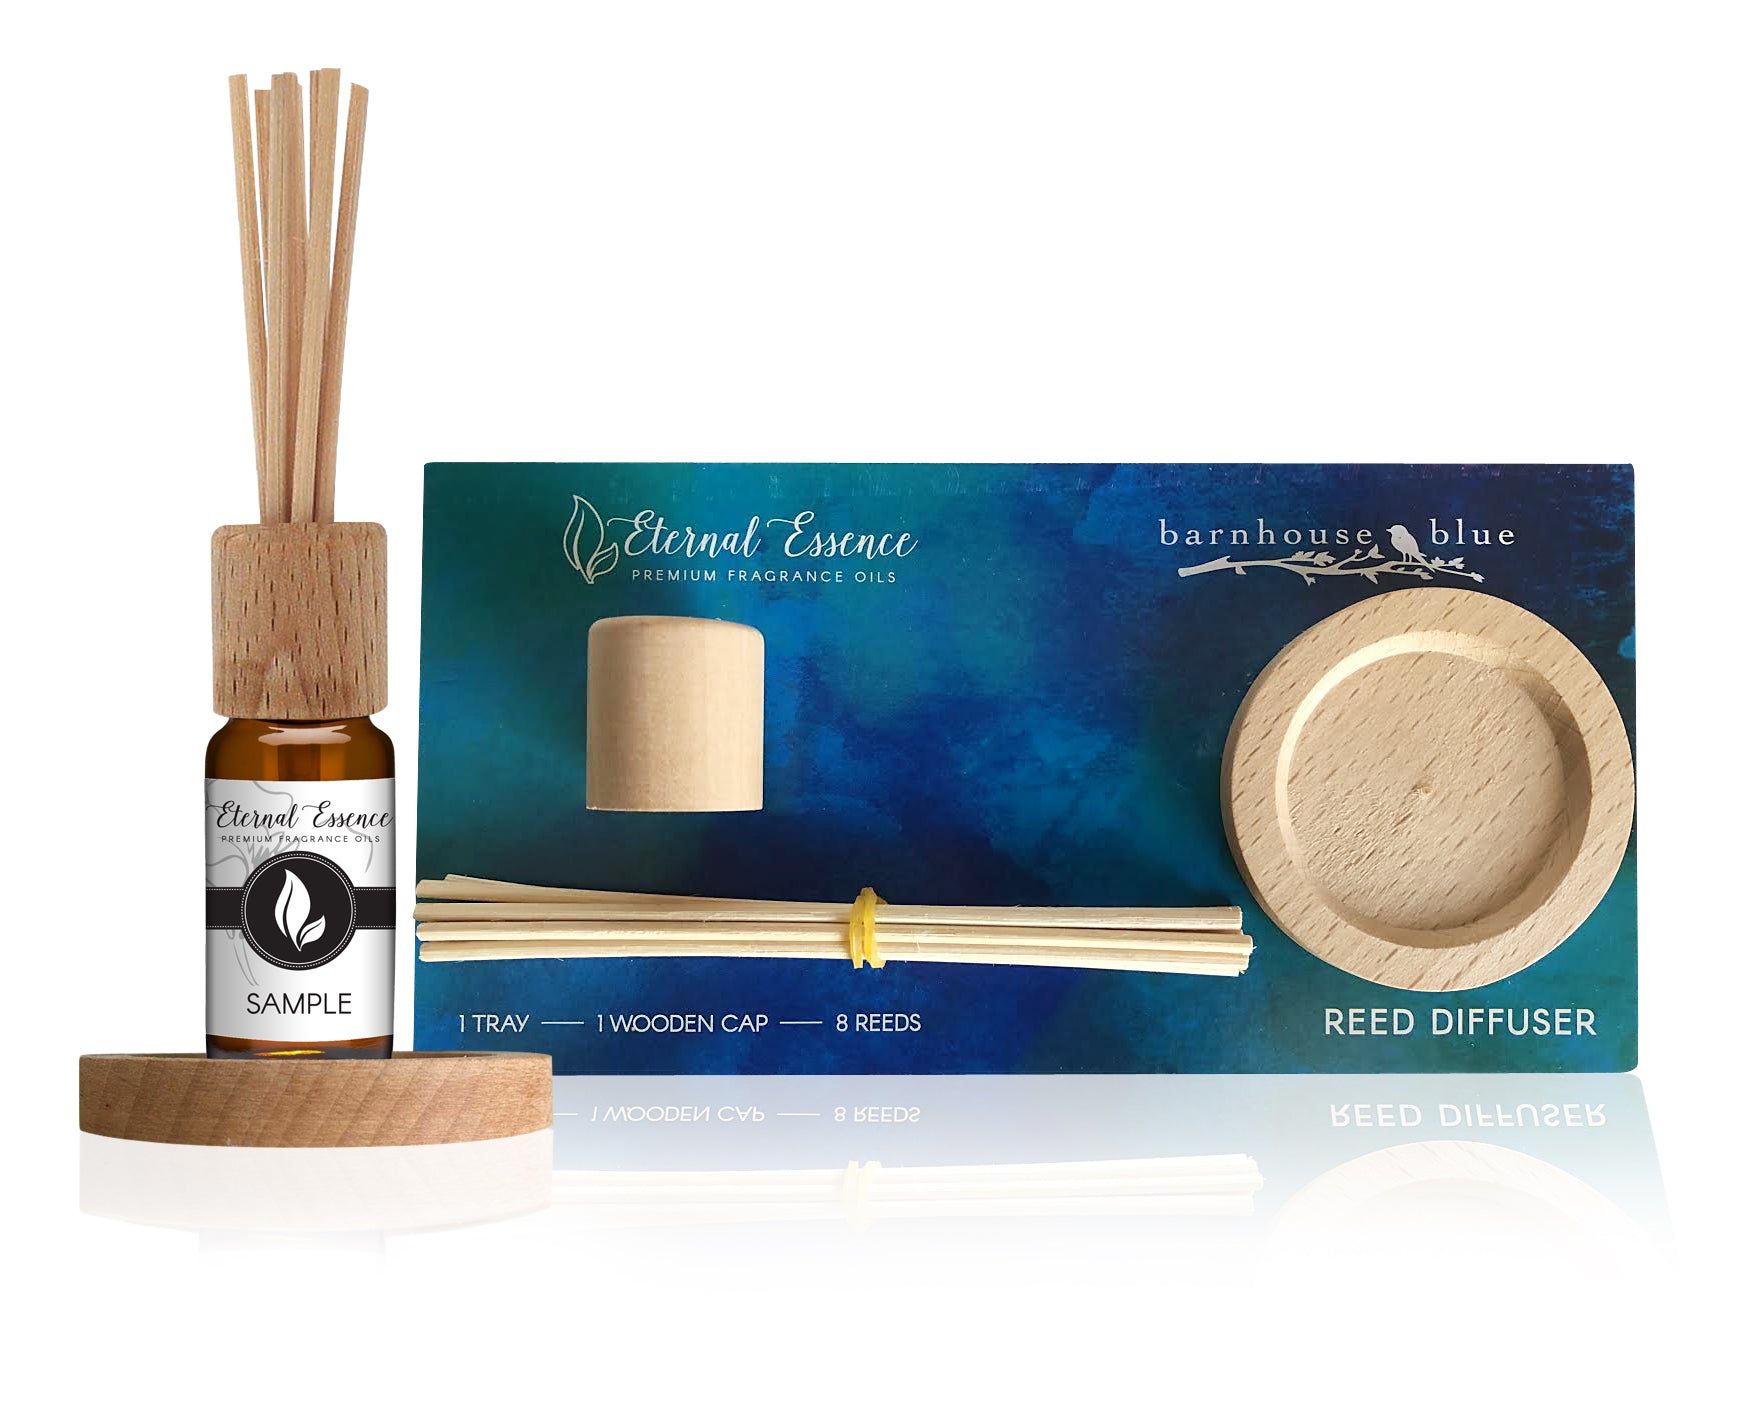 One Tray, one wooden cap, eight reeds - Eternal Essence Oils